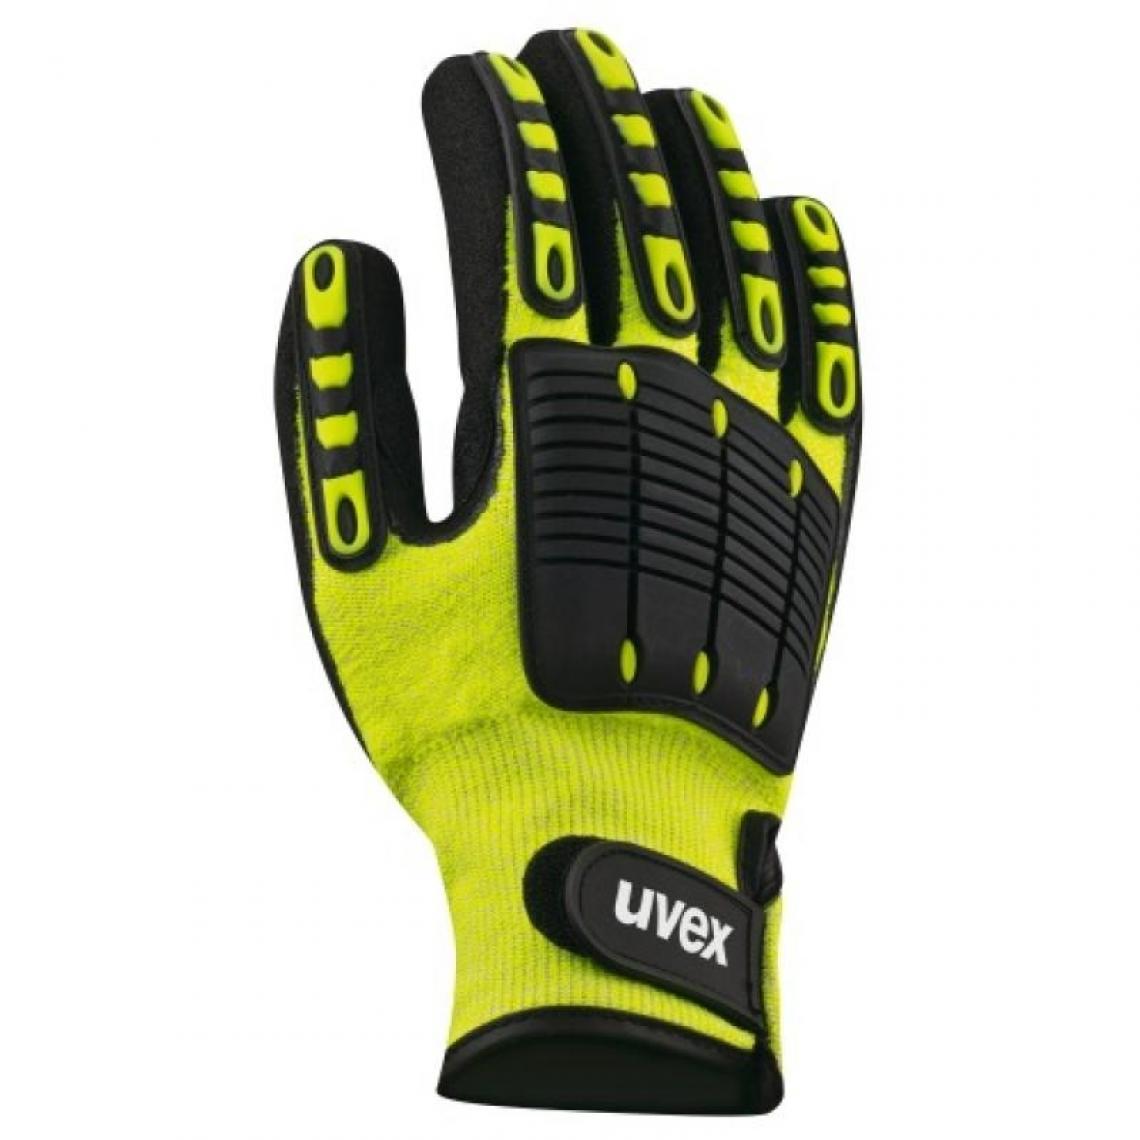 Uvex - Gants synexo impact1 T8 (bt10) - Protections pieds et mains